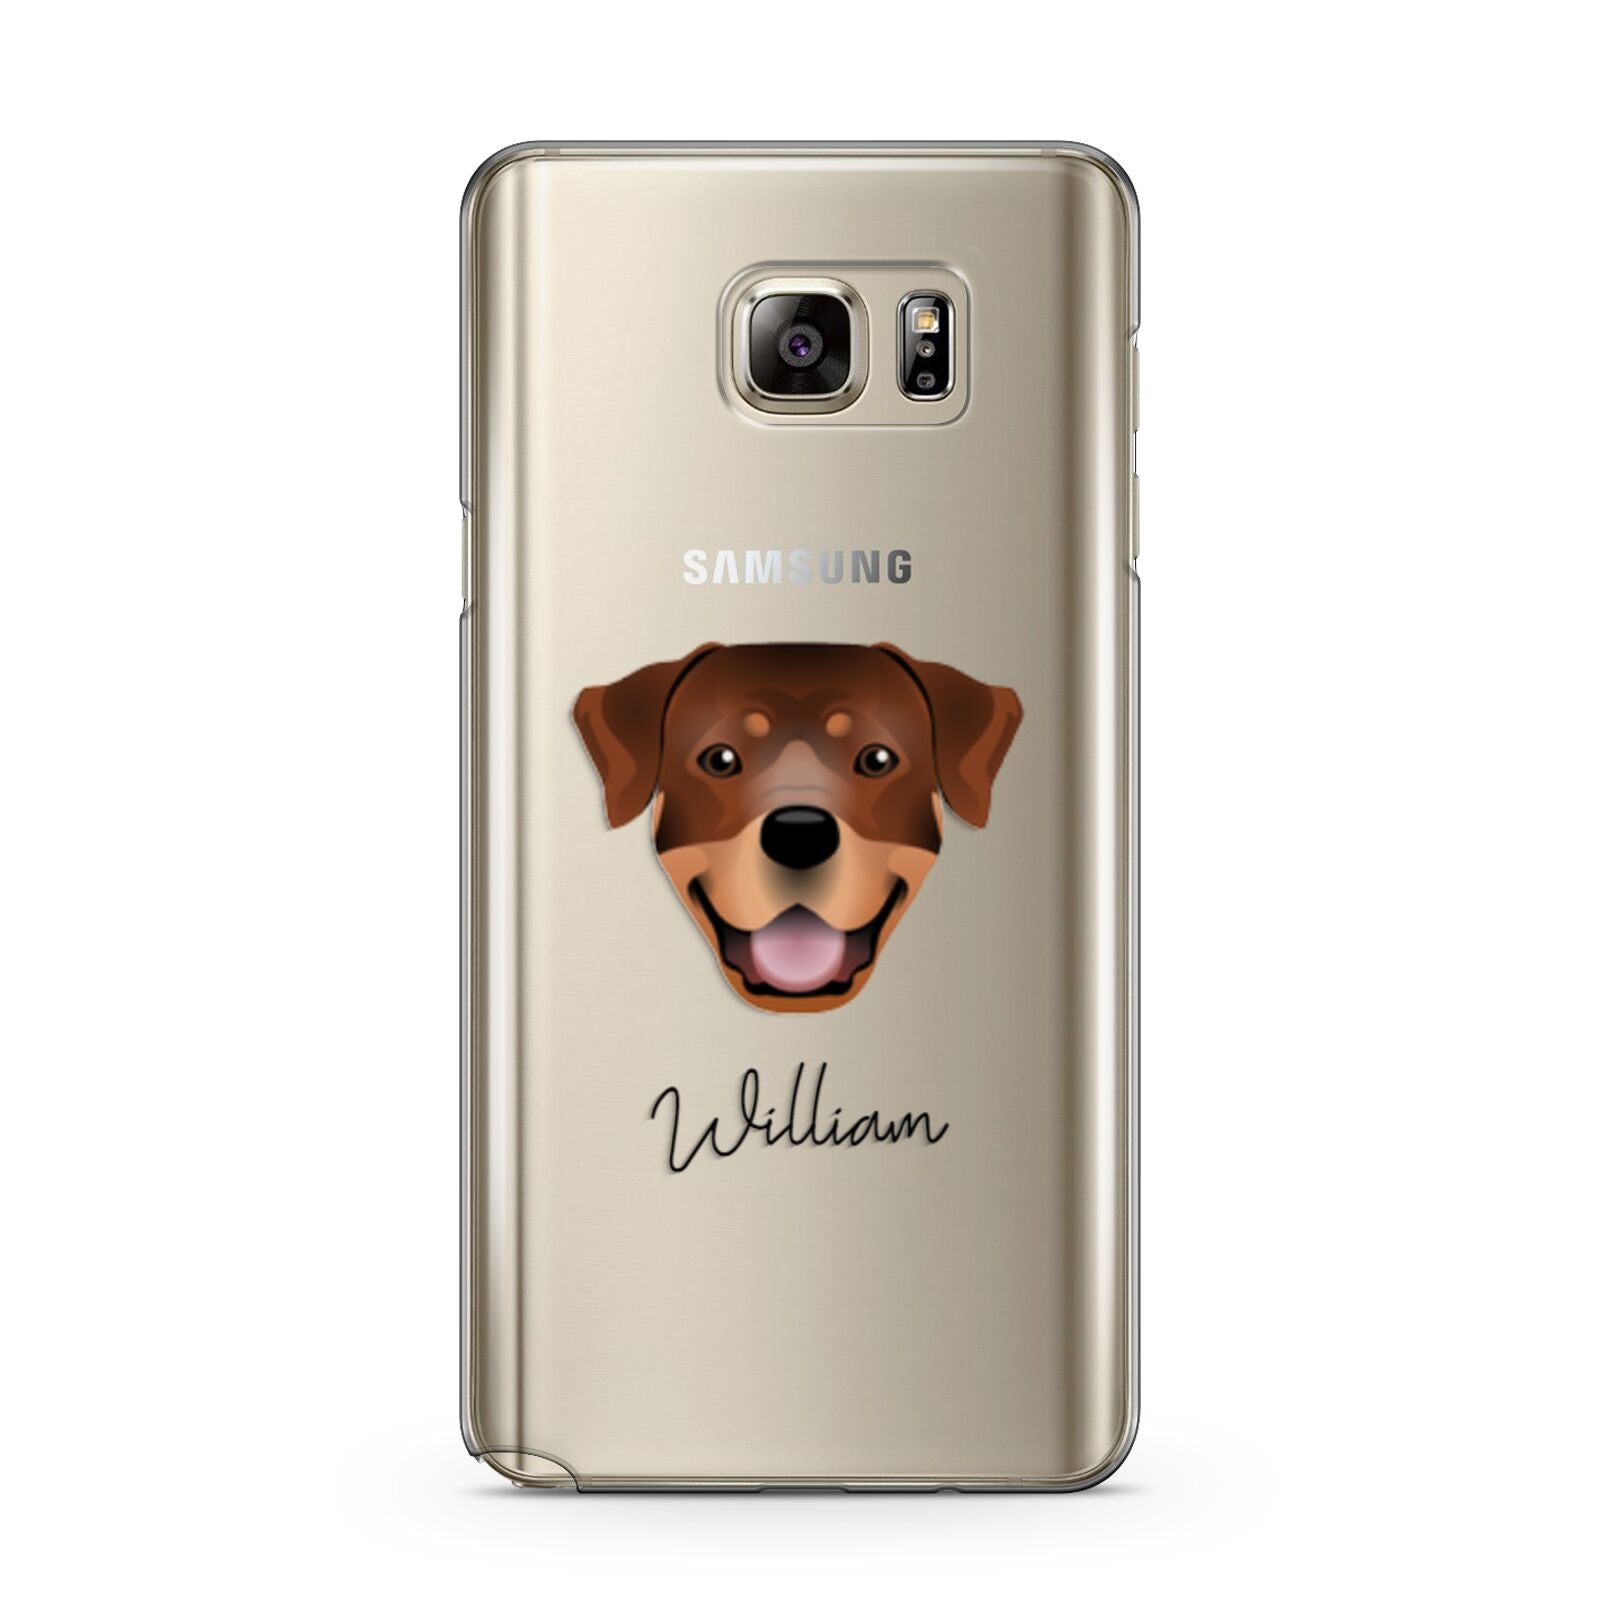 Rottweiler Personalised Samsung Galaxy Note 5 Case